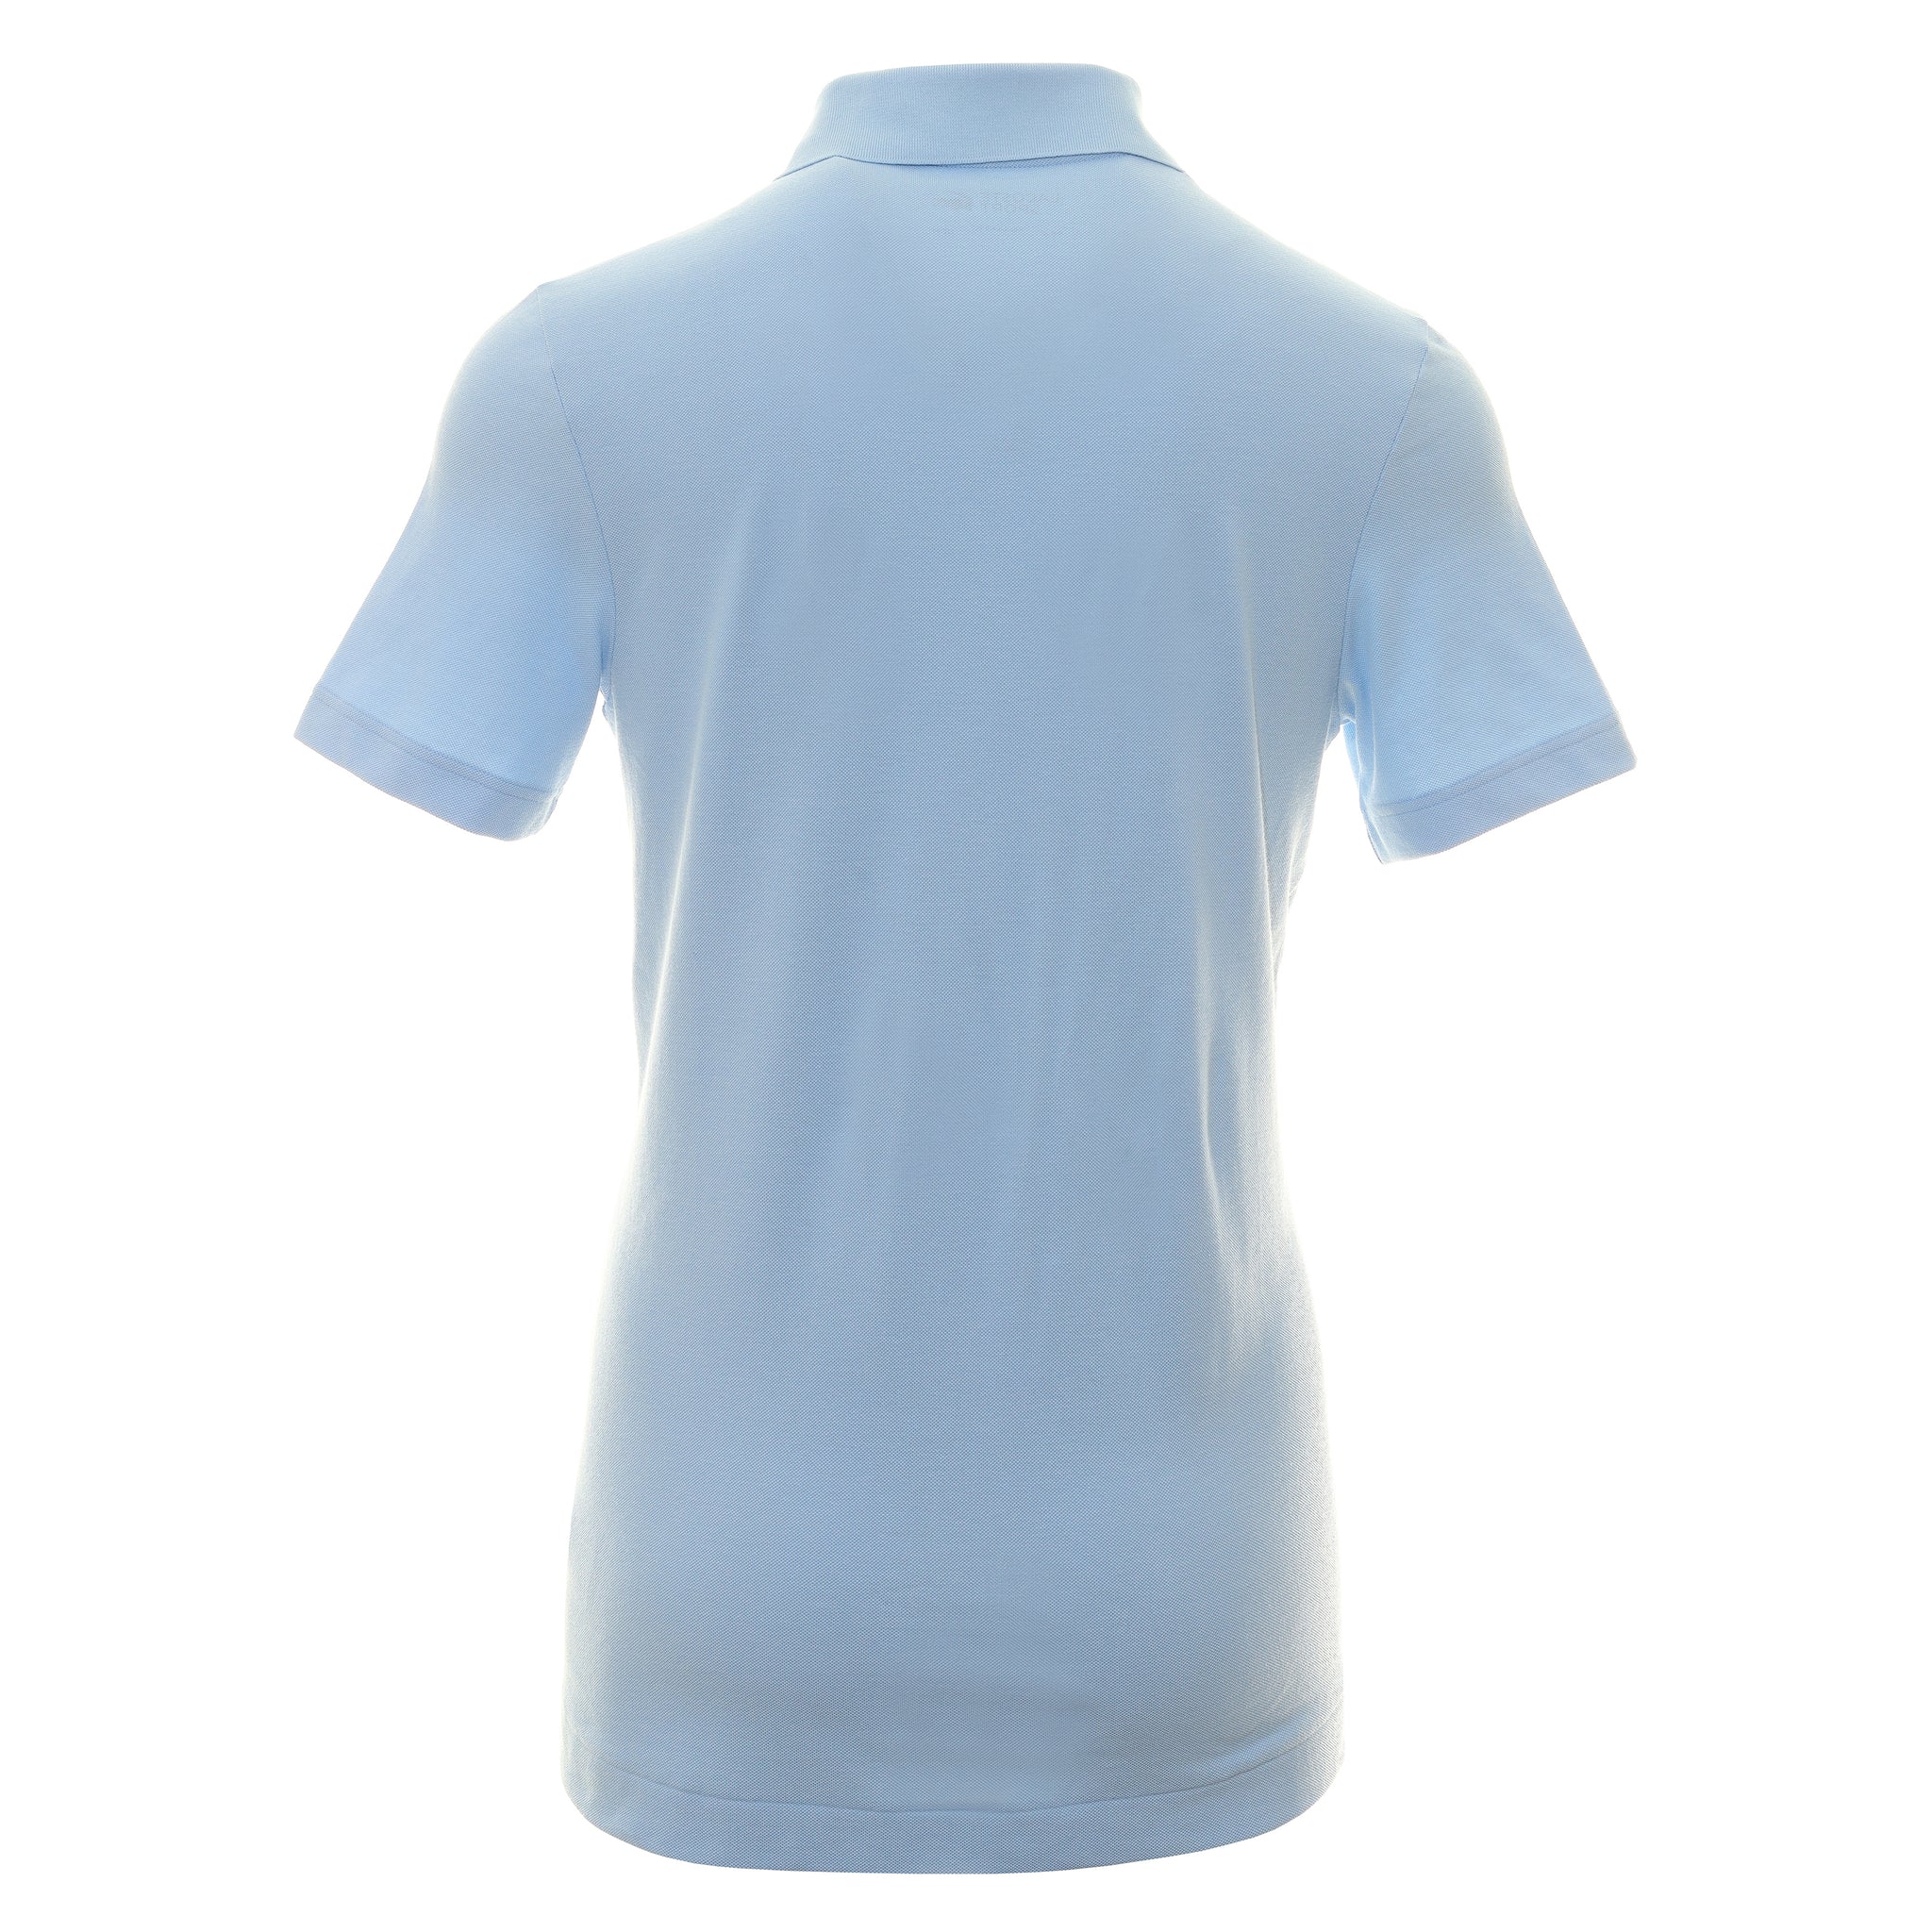 lacoste-sport-pique-polo-shirt-dh9309-overview-blue-gn2-function18